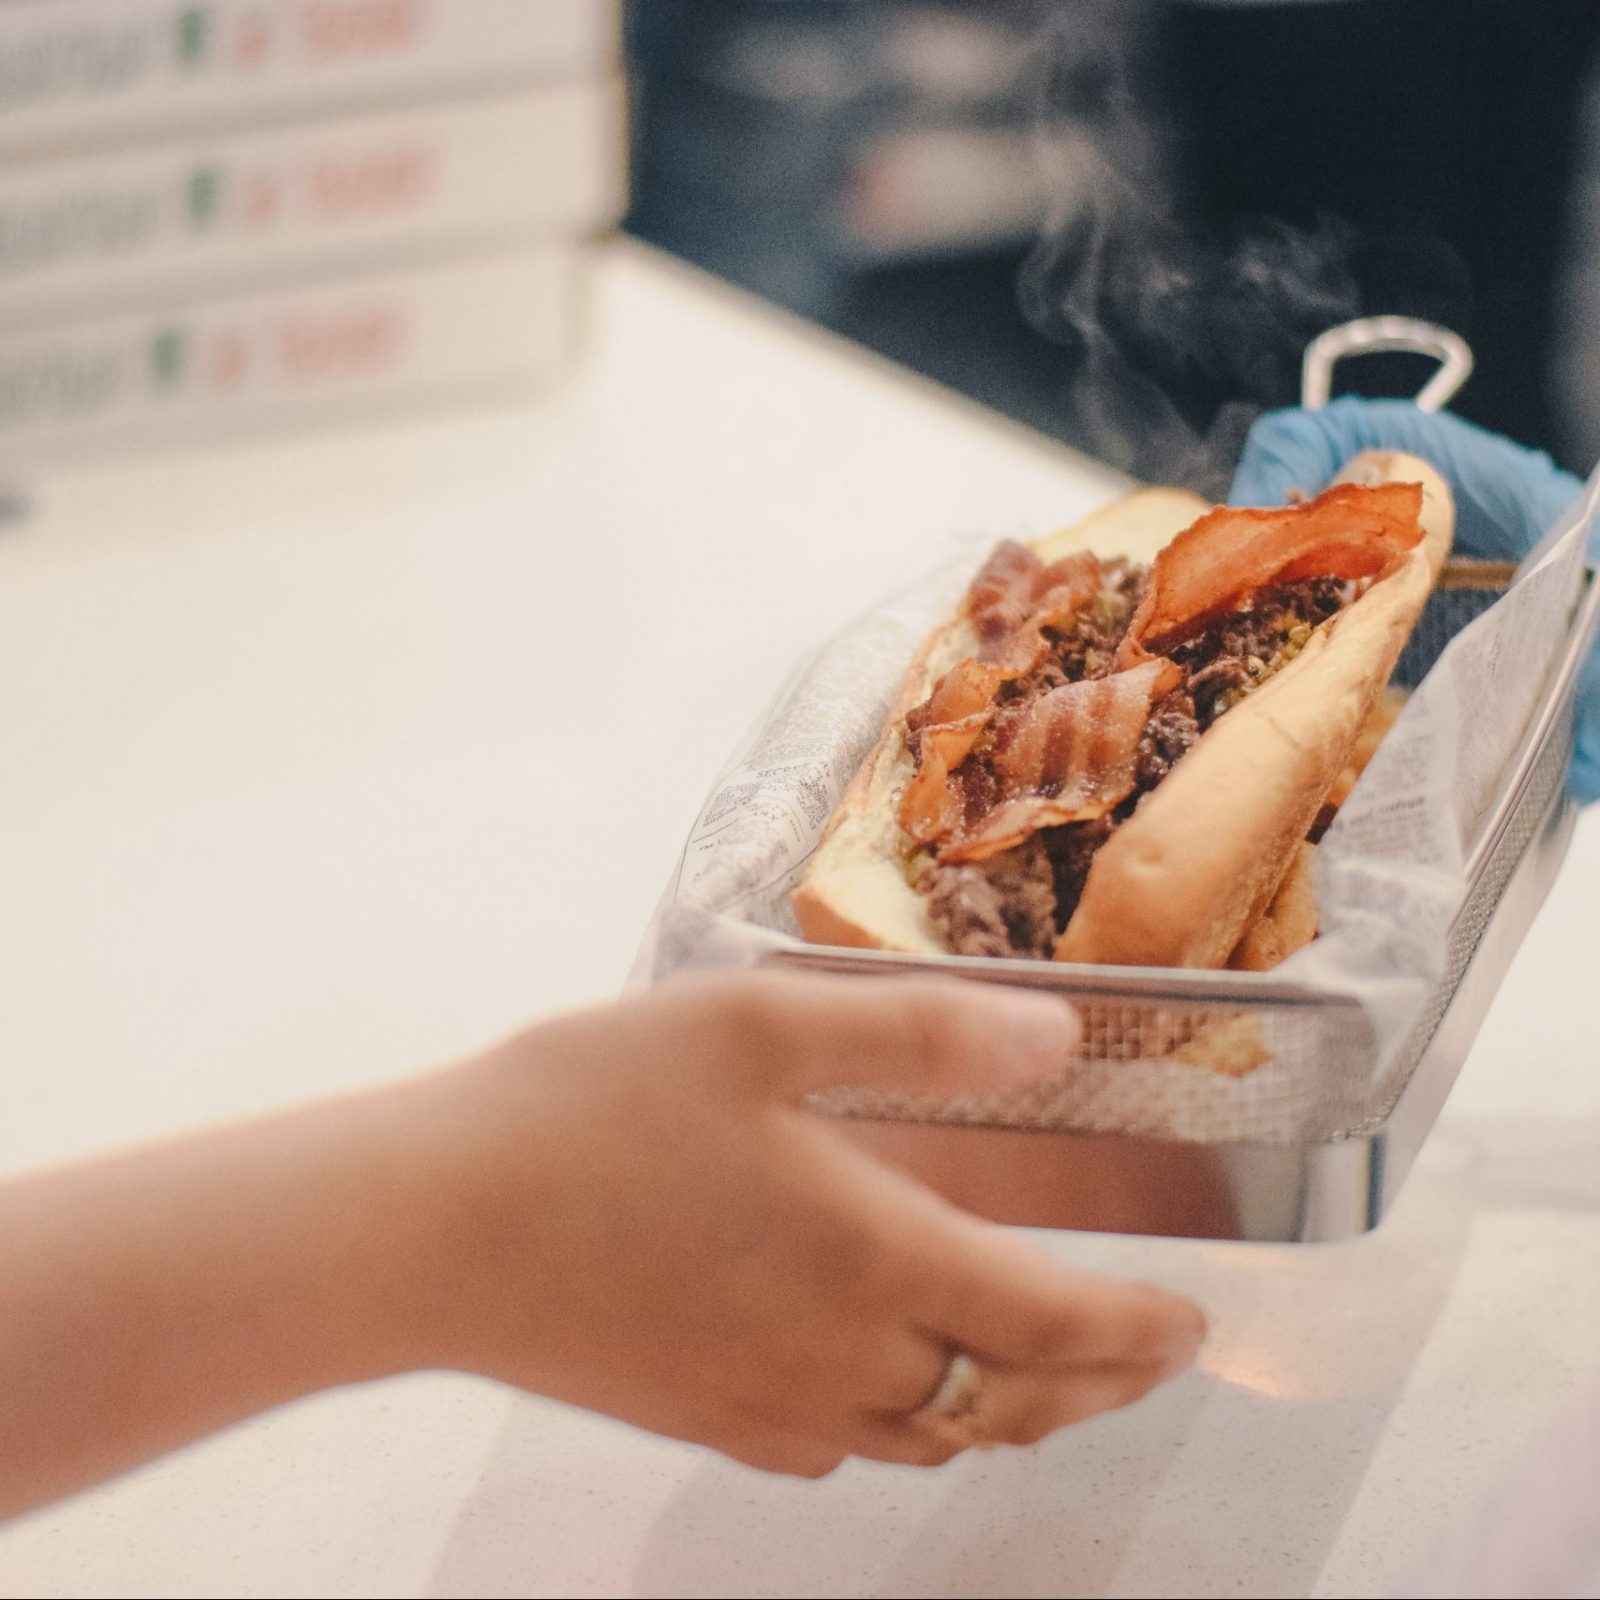 A person's hand holding a Tono cheesesteak in a basket